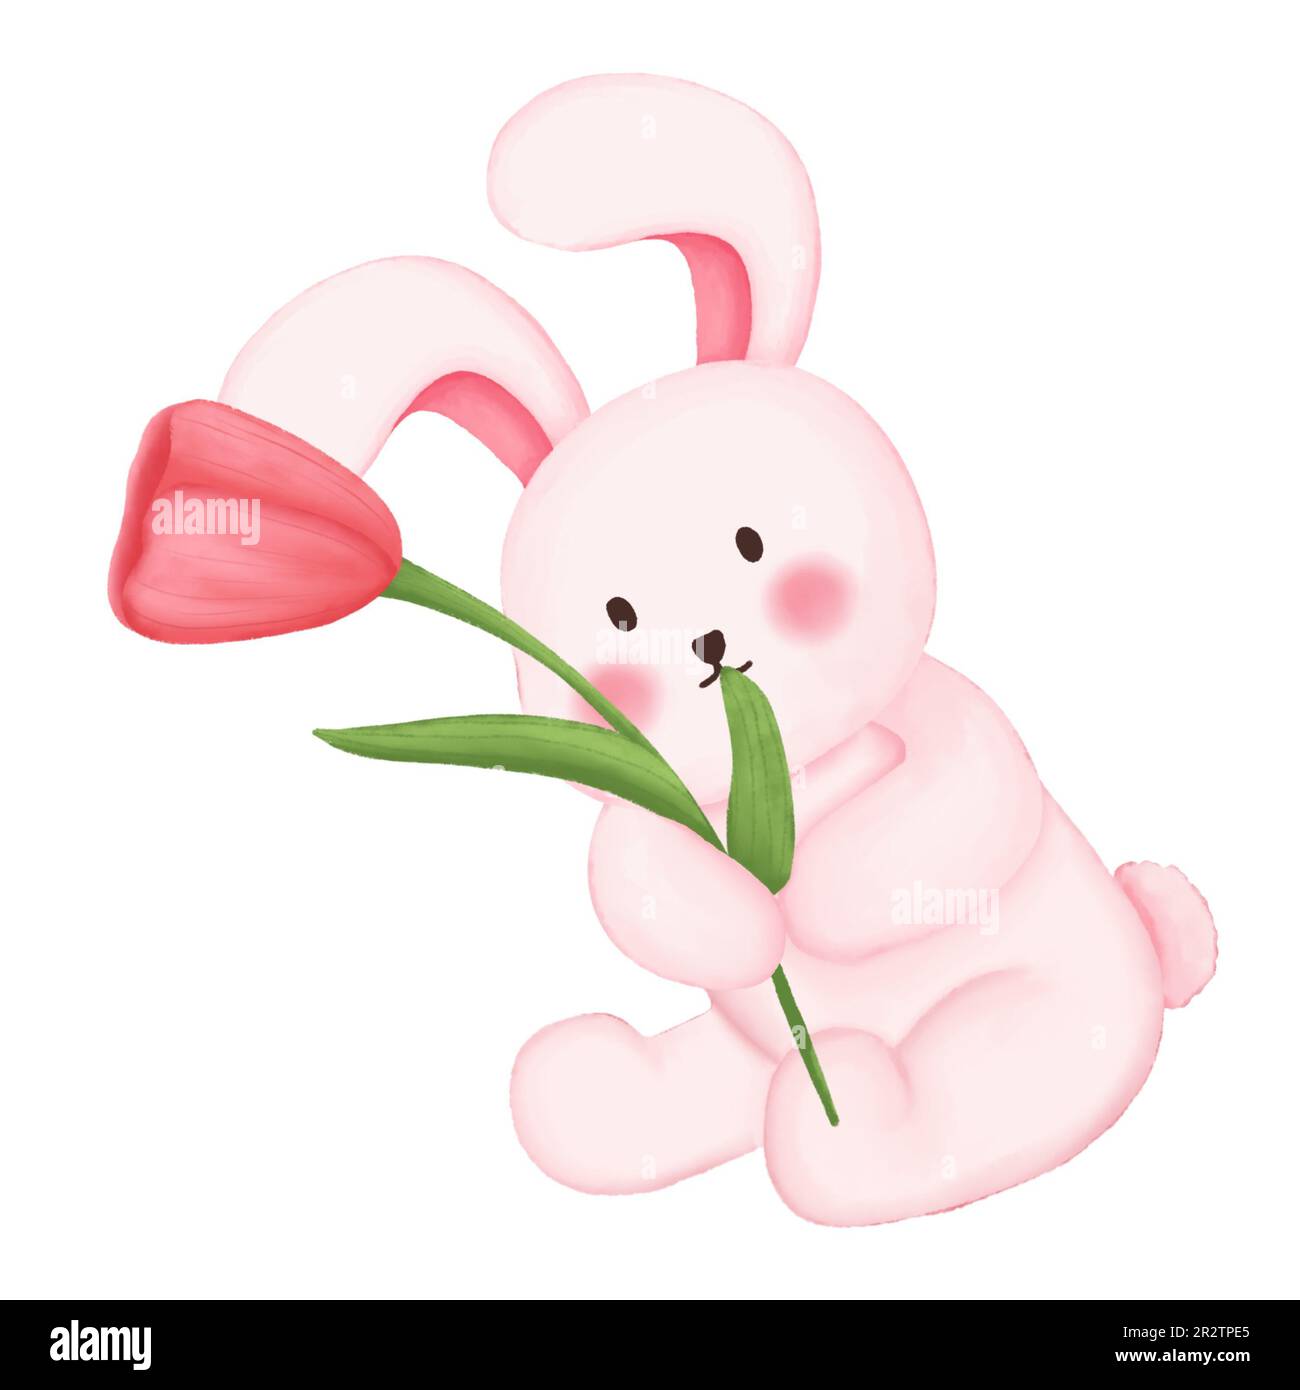 Watercolor bunny and tulip flower. Watercolor easter bunny illustration. Easter day,greeting cards,wallpaper,scrapbook,etc. Stock Photo